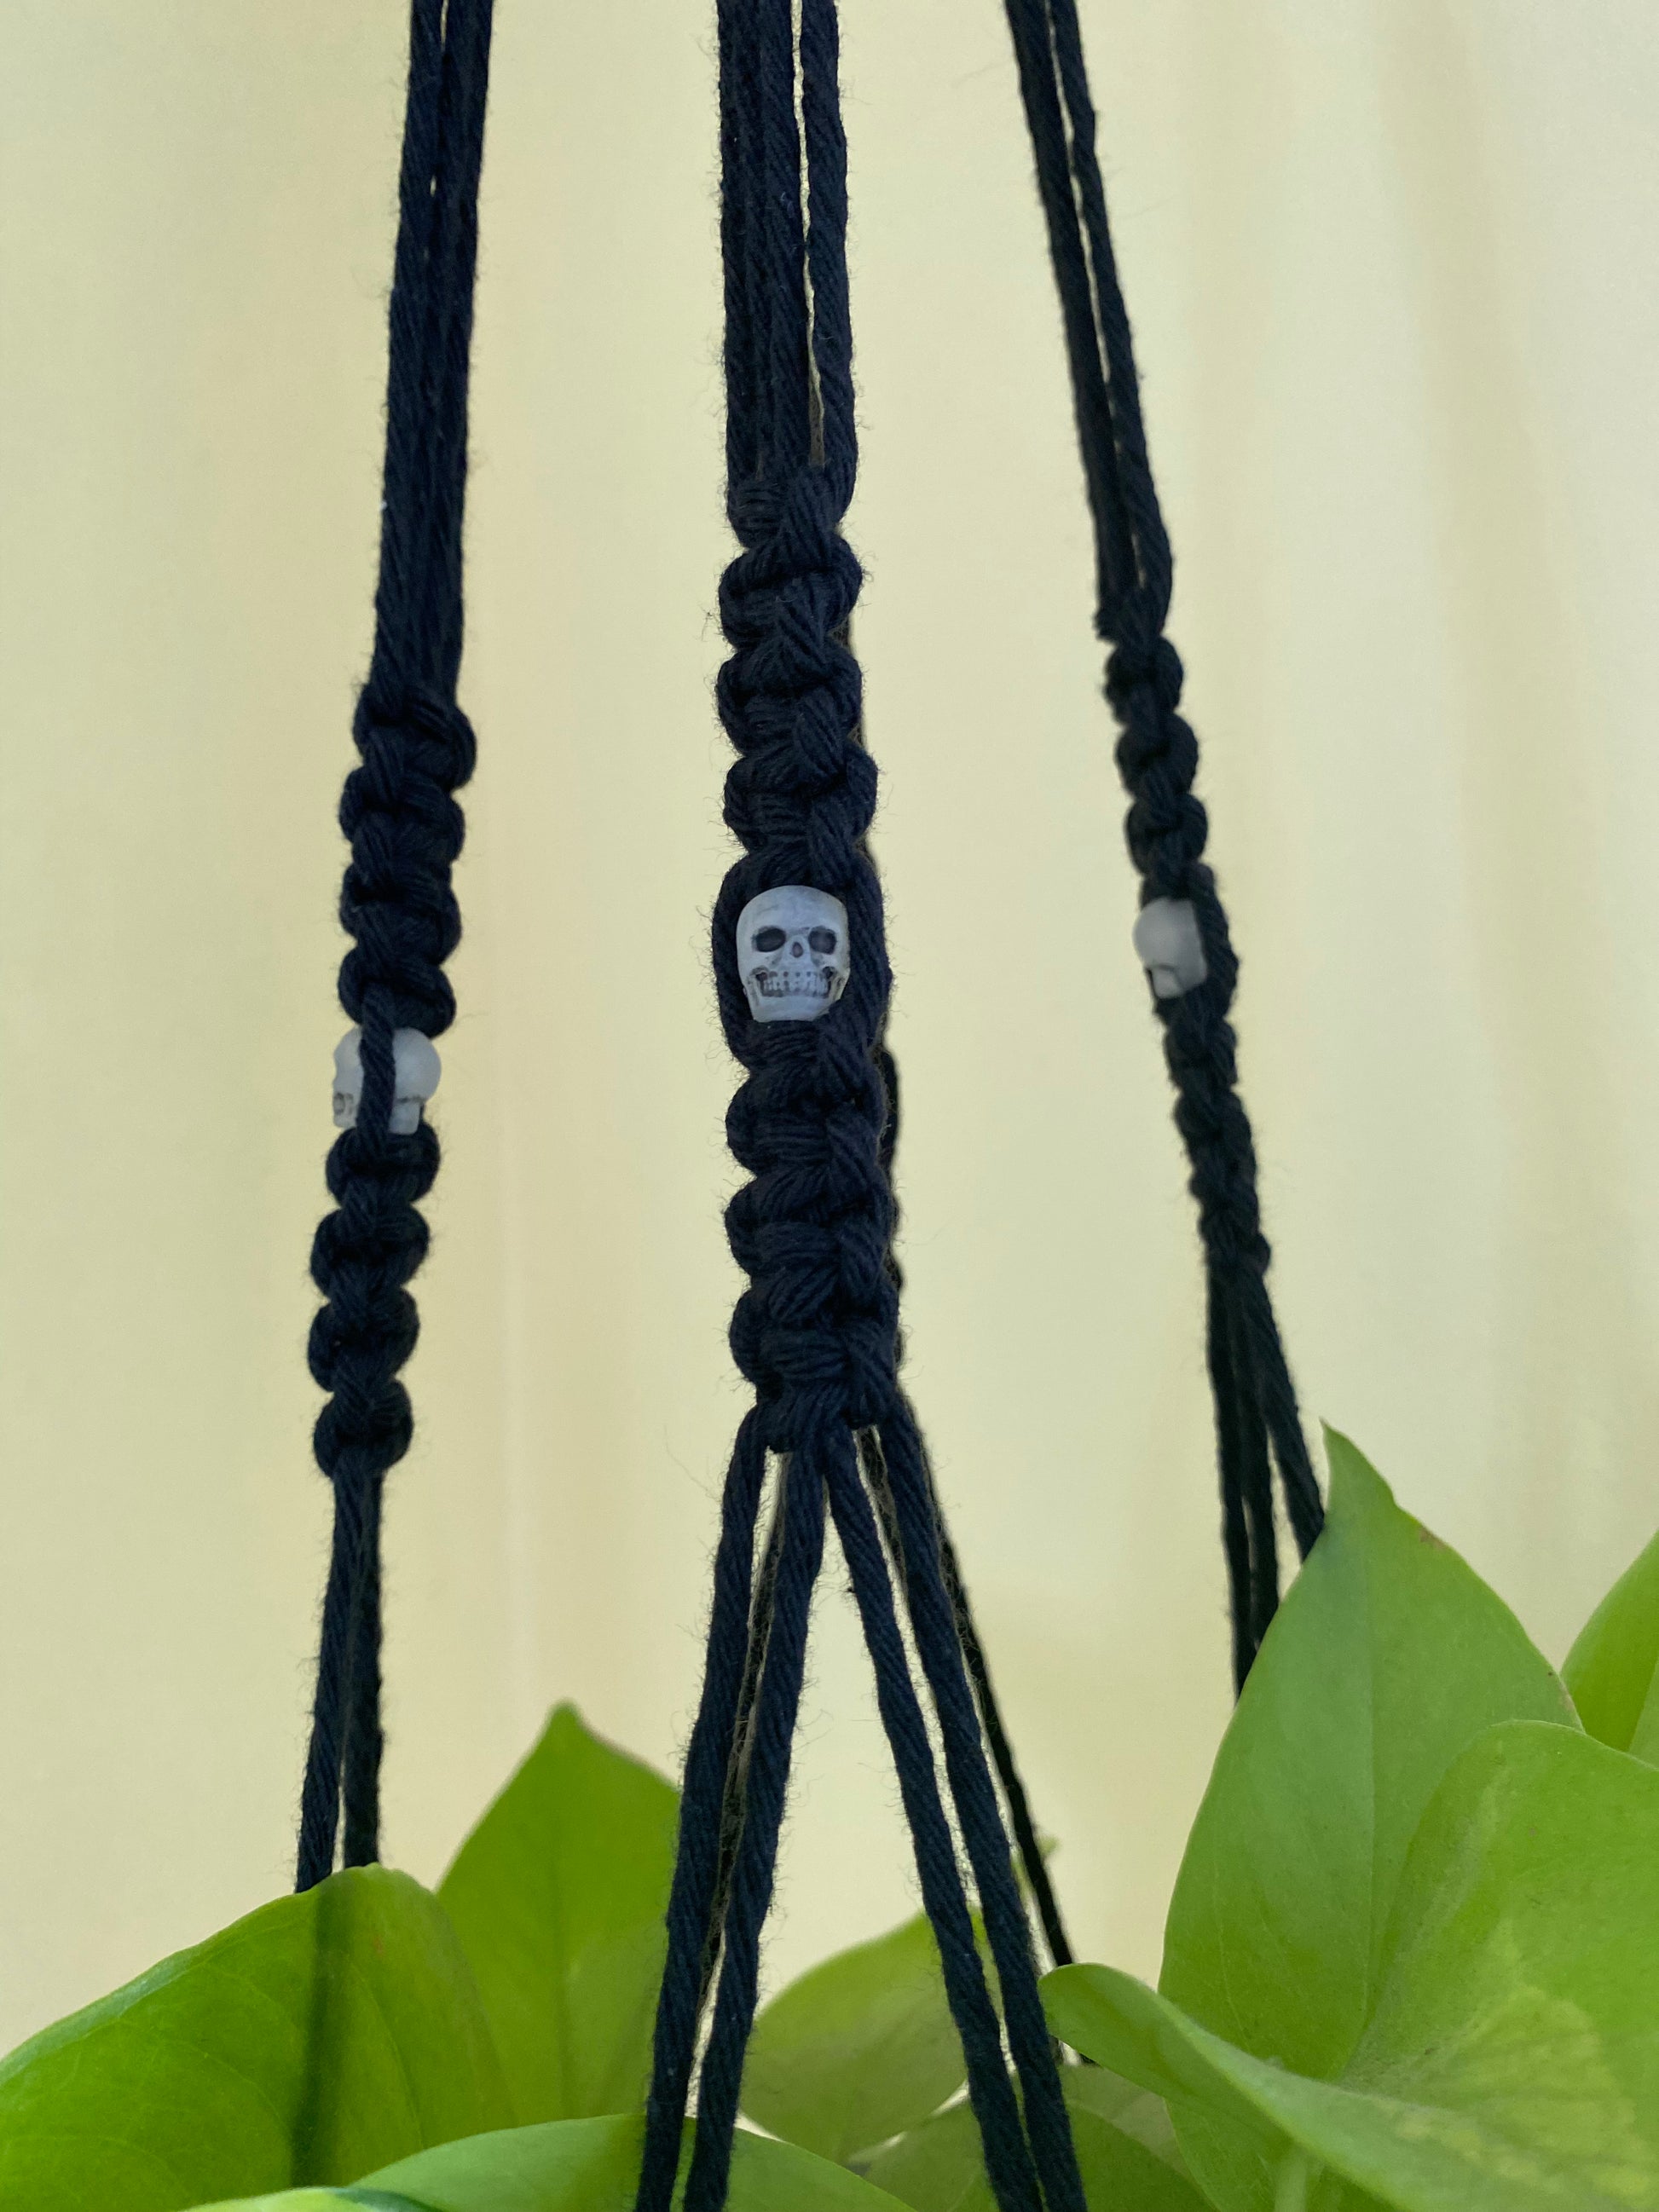 How to Make a Simple Macrame Wall Hanging with Beads - Macra-Made